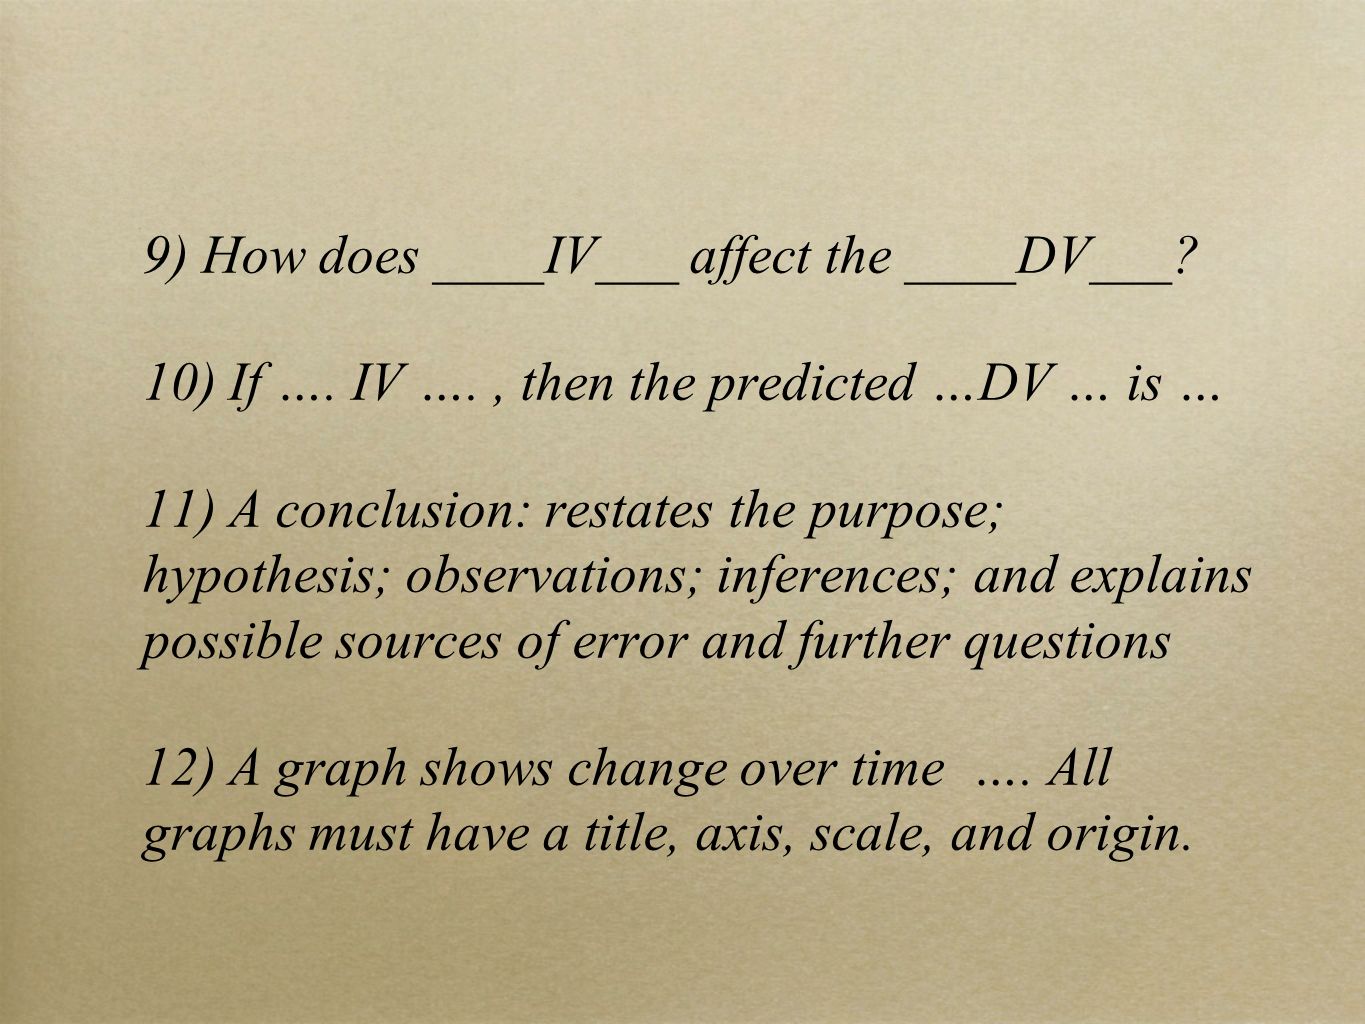 9) How does ____IV___ affect the ____DV___